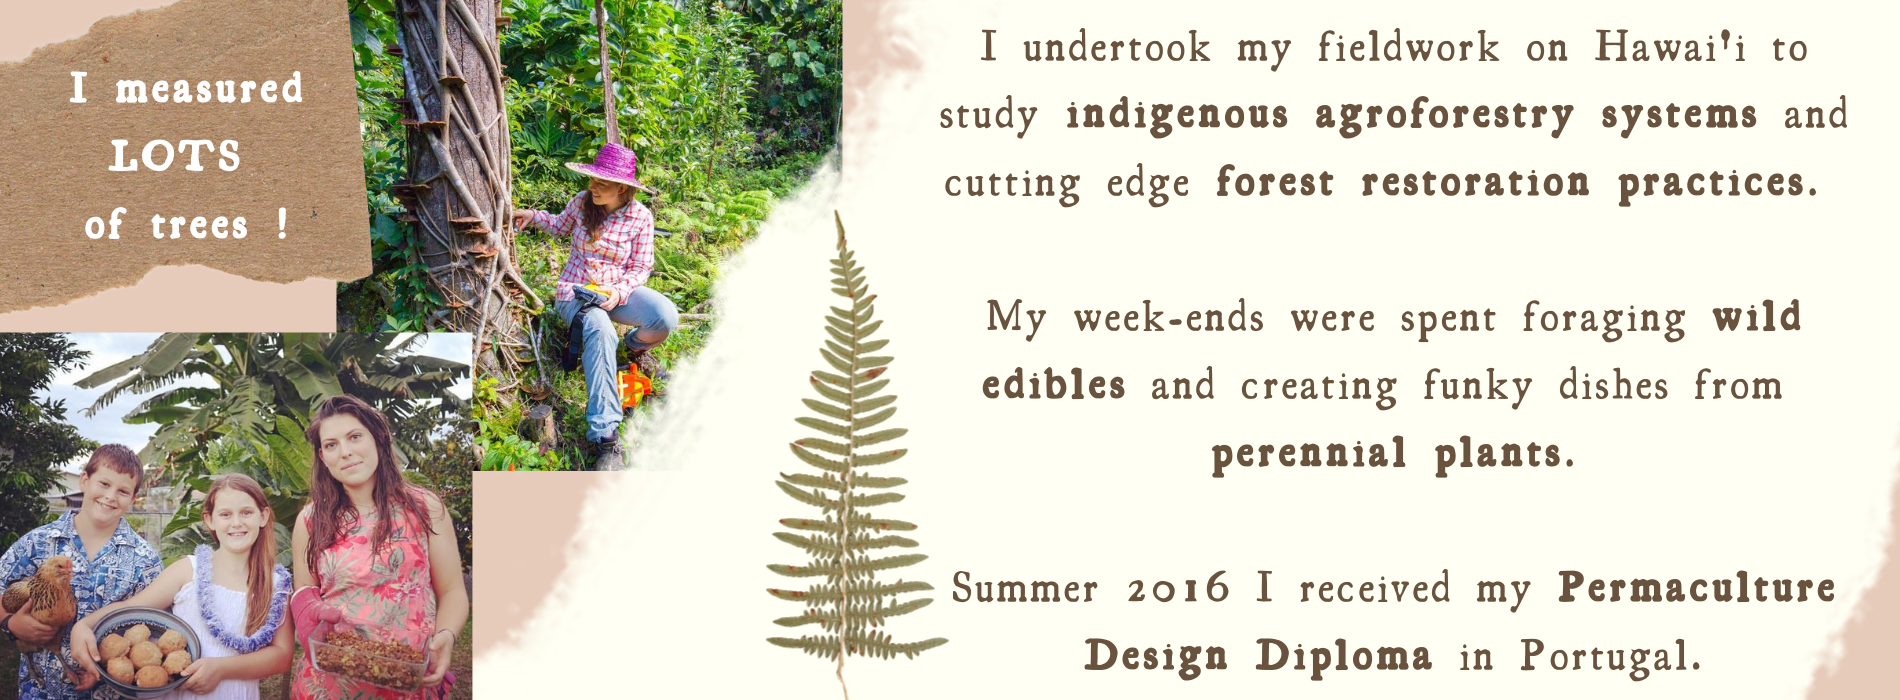 I undertook my fieldwork on Hawai'i to study indigenous agroforestry systems and cutting edge forest restoration practices.   My week-ends were spent foraging wild edibles and creating funky dishes from  perennial plants.  Summer 2016 I received my Permaculture Design Diploma in Portugal. I measured lots of trees!